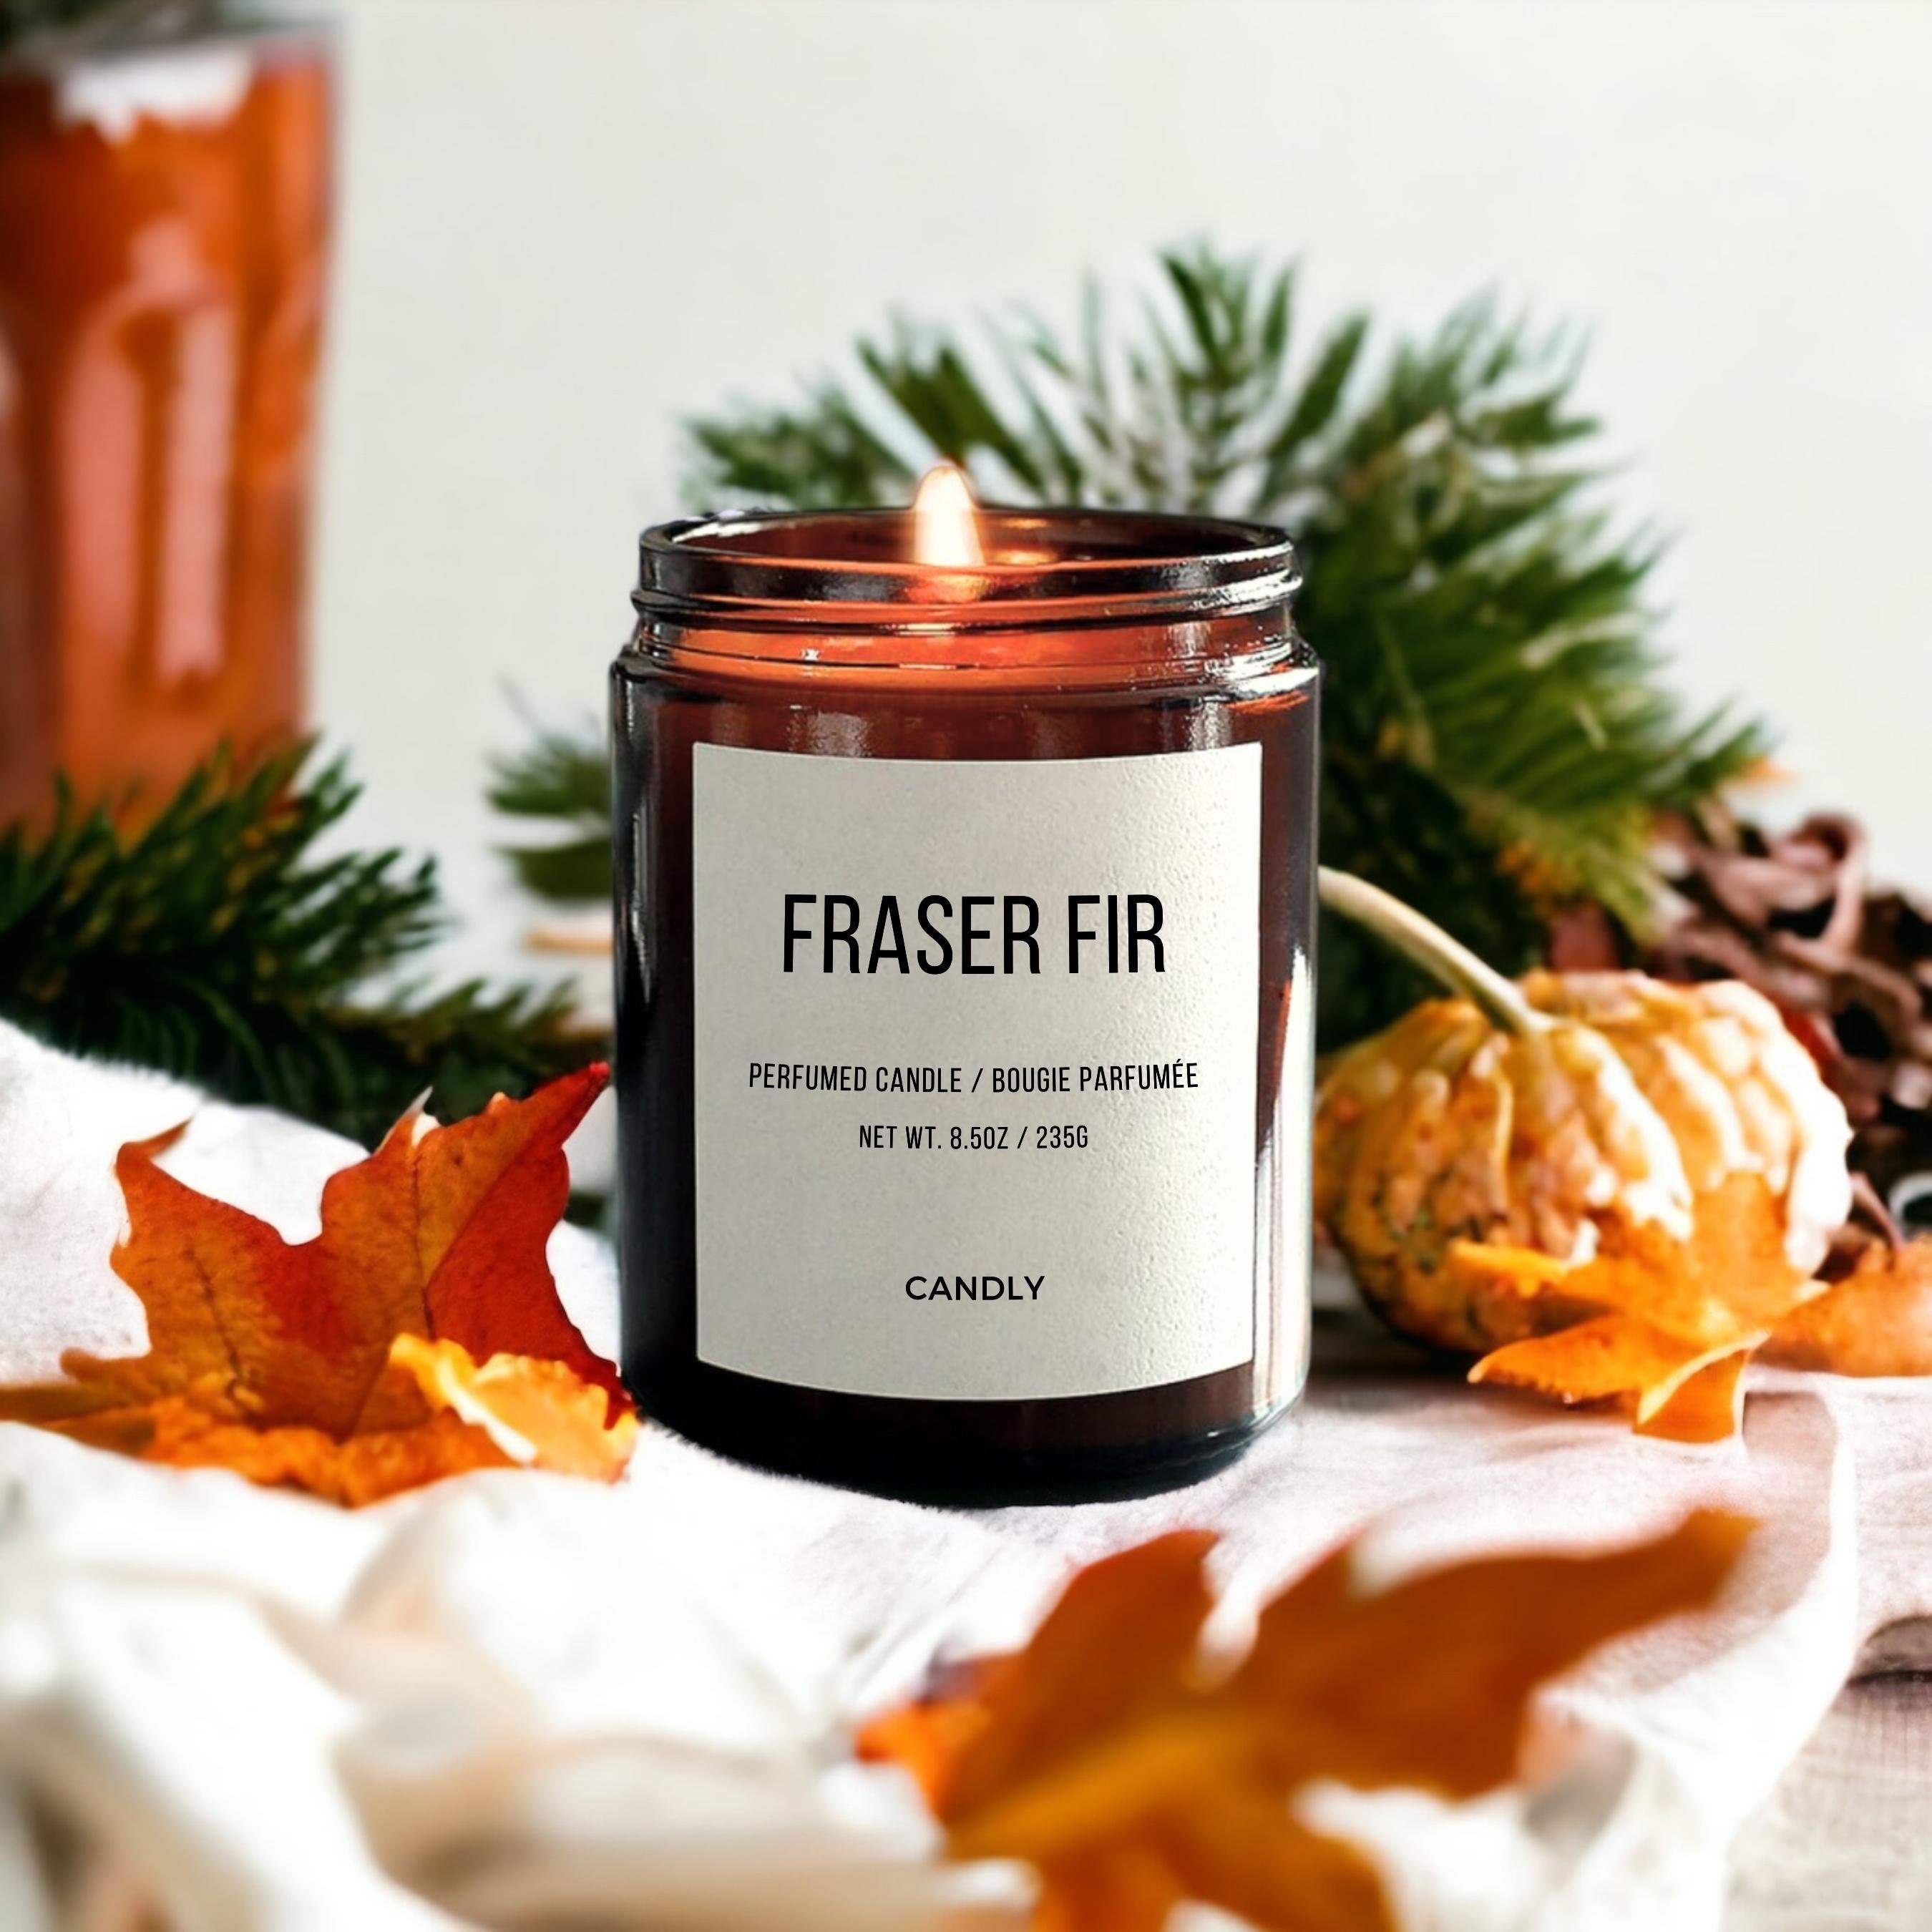 Fraser Fir Soy Candle, Amber Jar Candle, Pine Candle, Spruce Balsam Candle,  Candle in Jar, Winter Christmas Candle, Host Gift, Gift for Her 